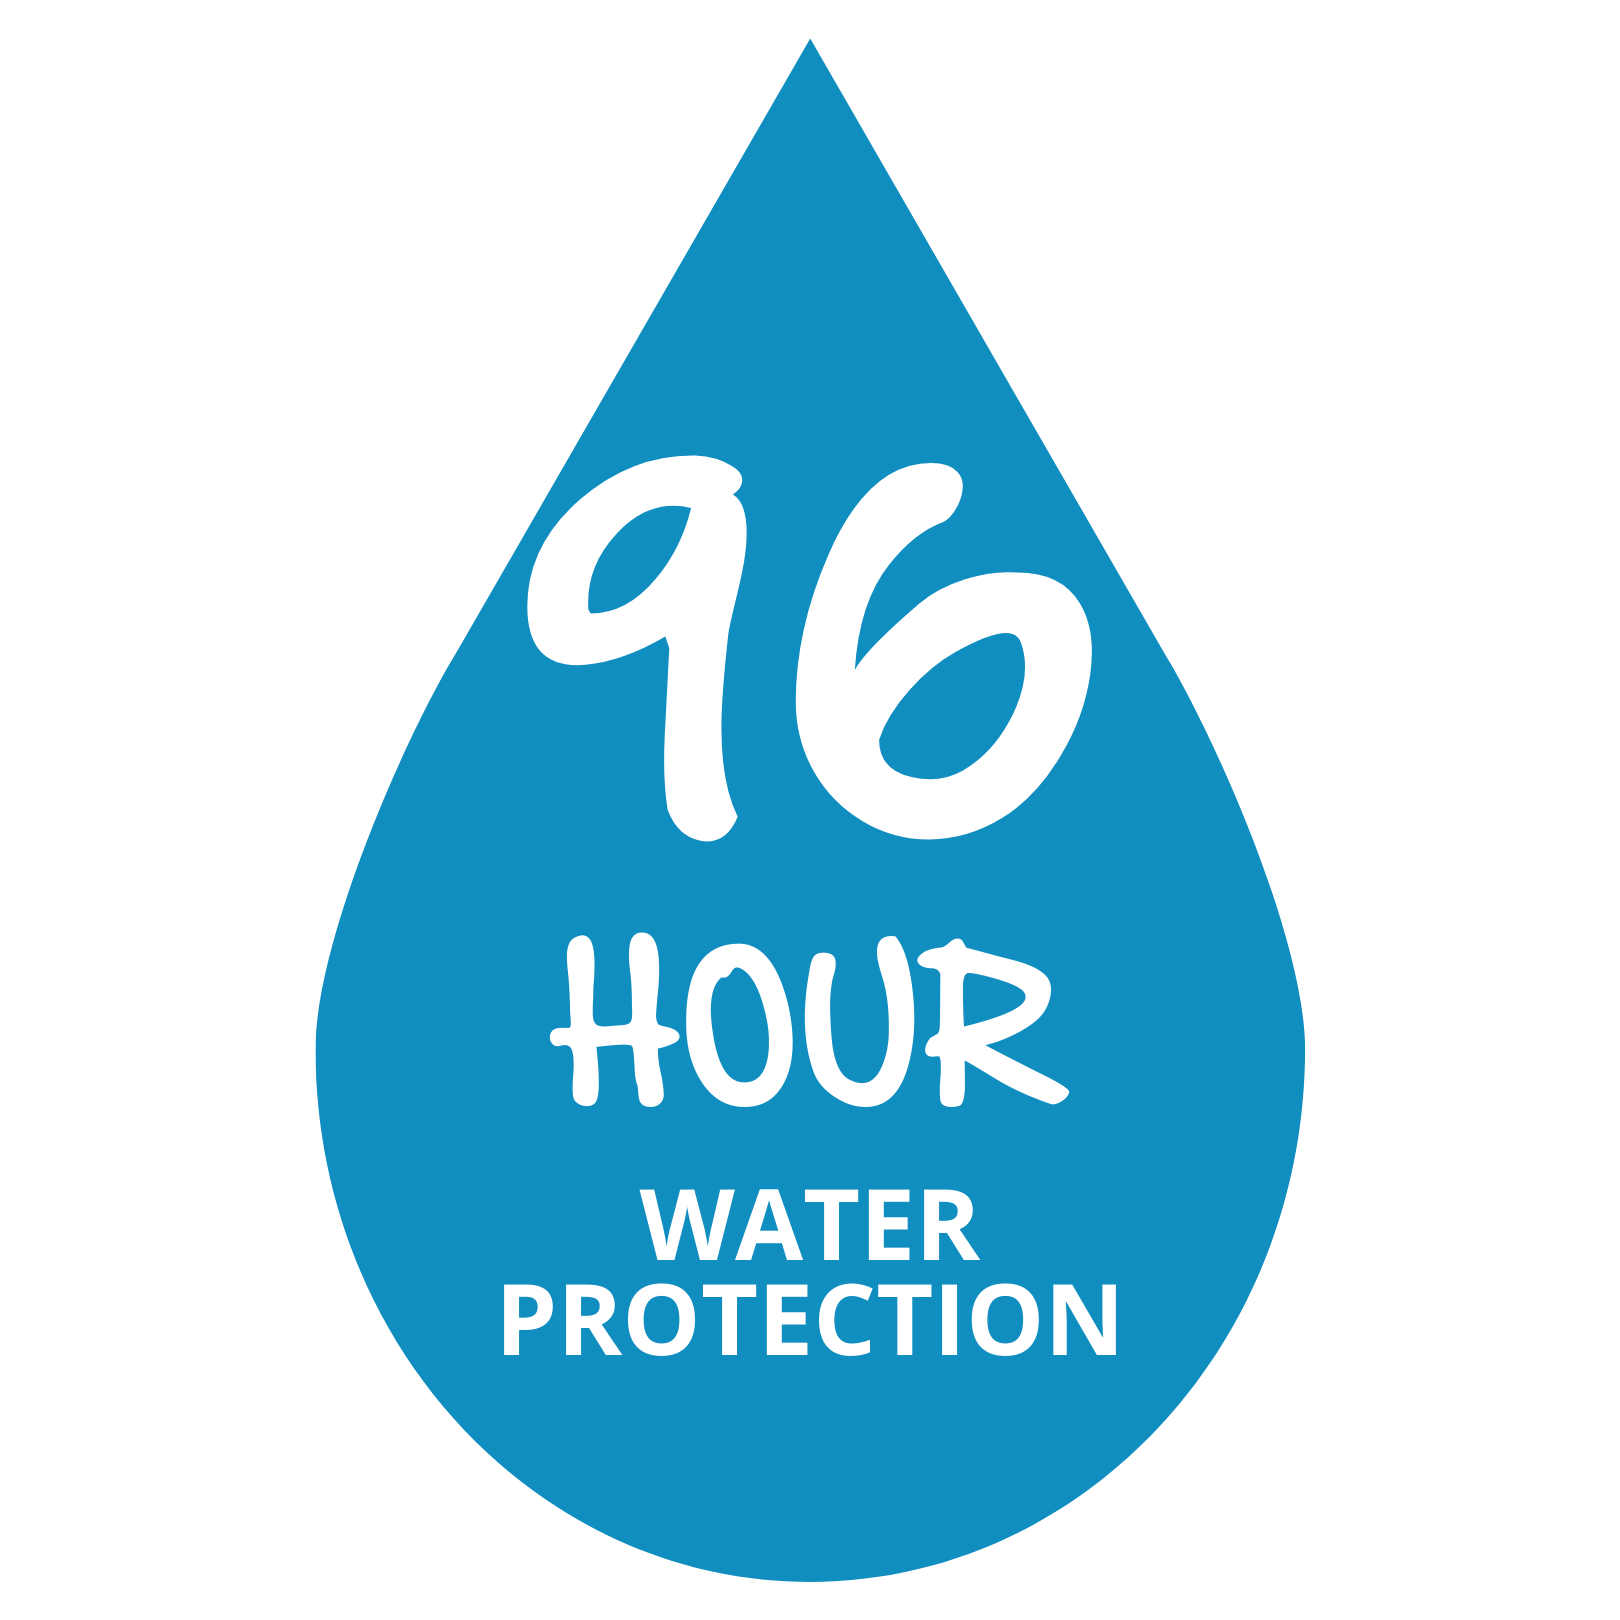 96 hour water protection